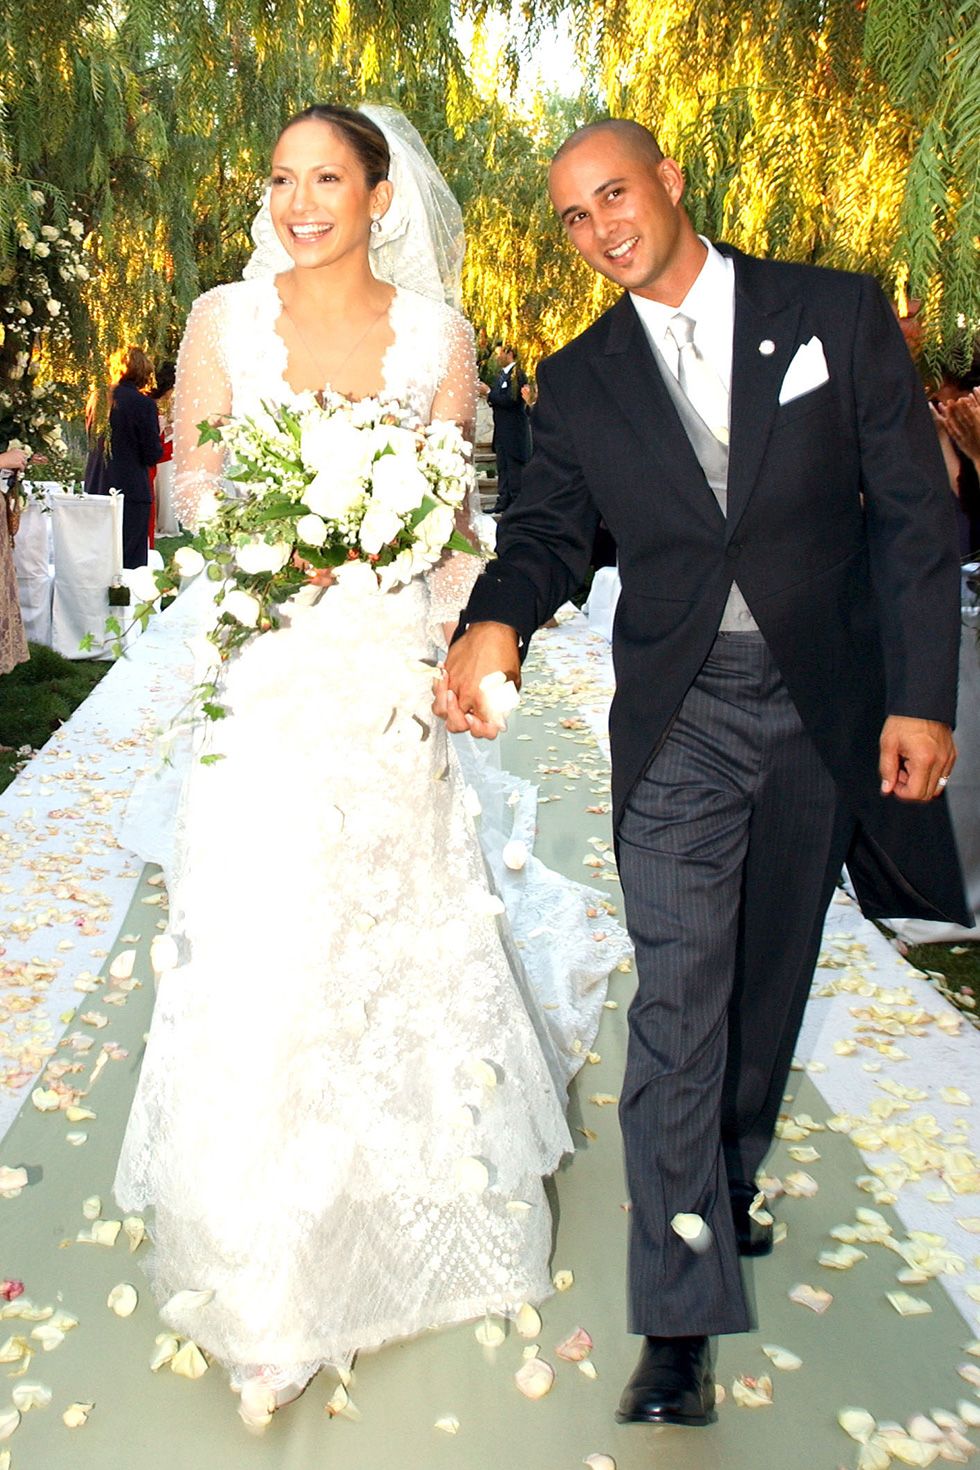 The best celebrity wedding gowns